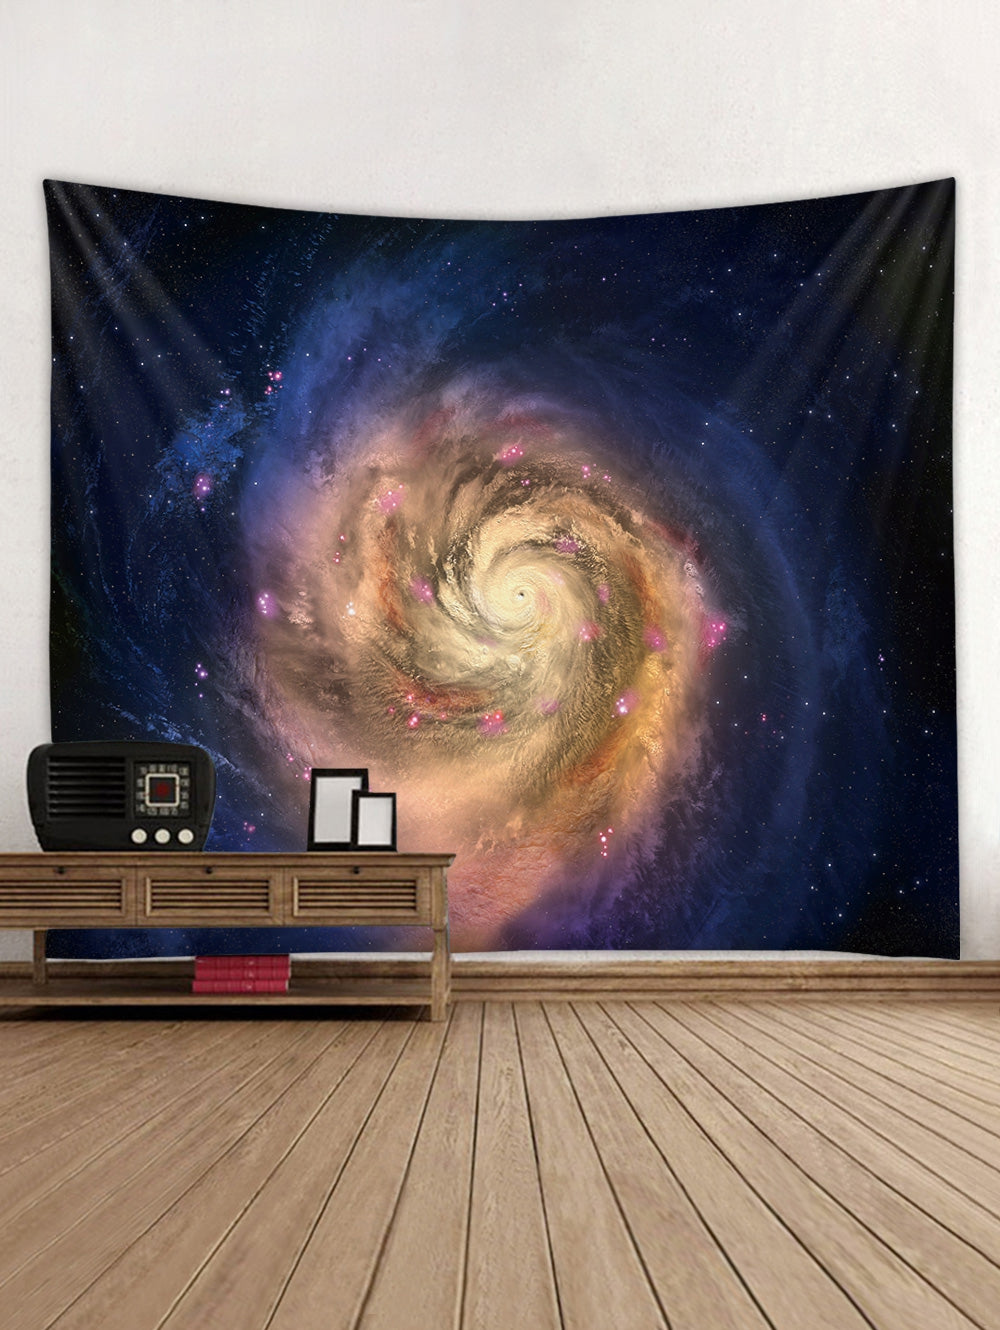 Starry Sky Universe Print Tapestry Wall Art Decoration